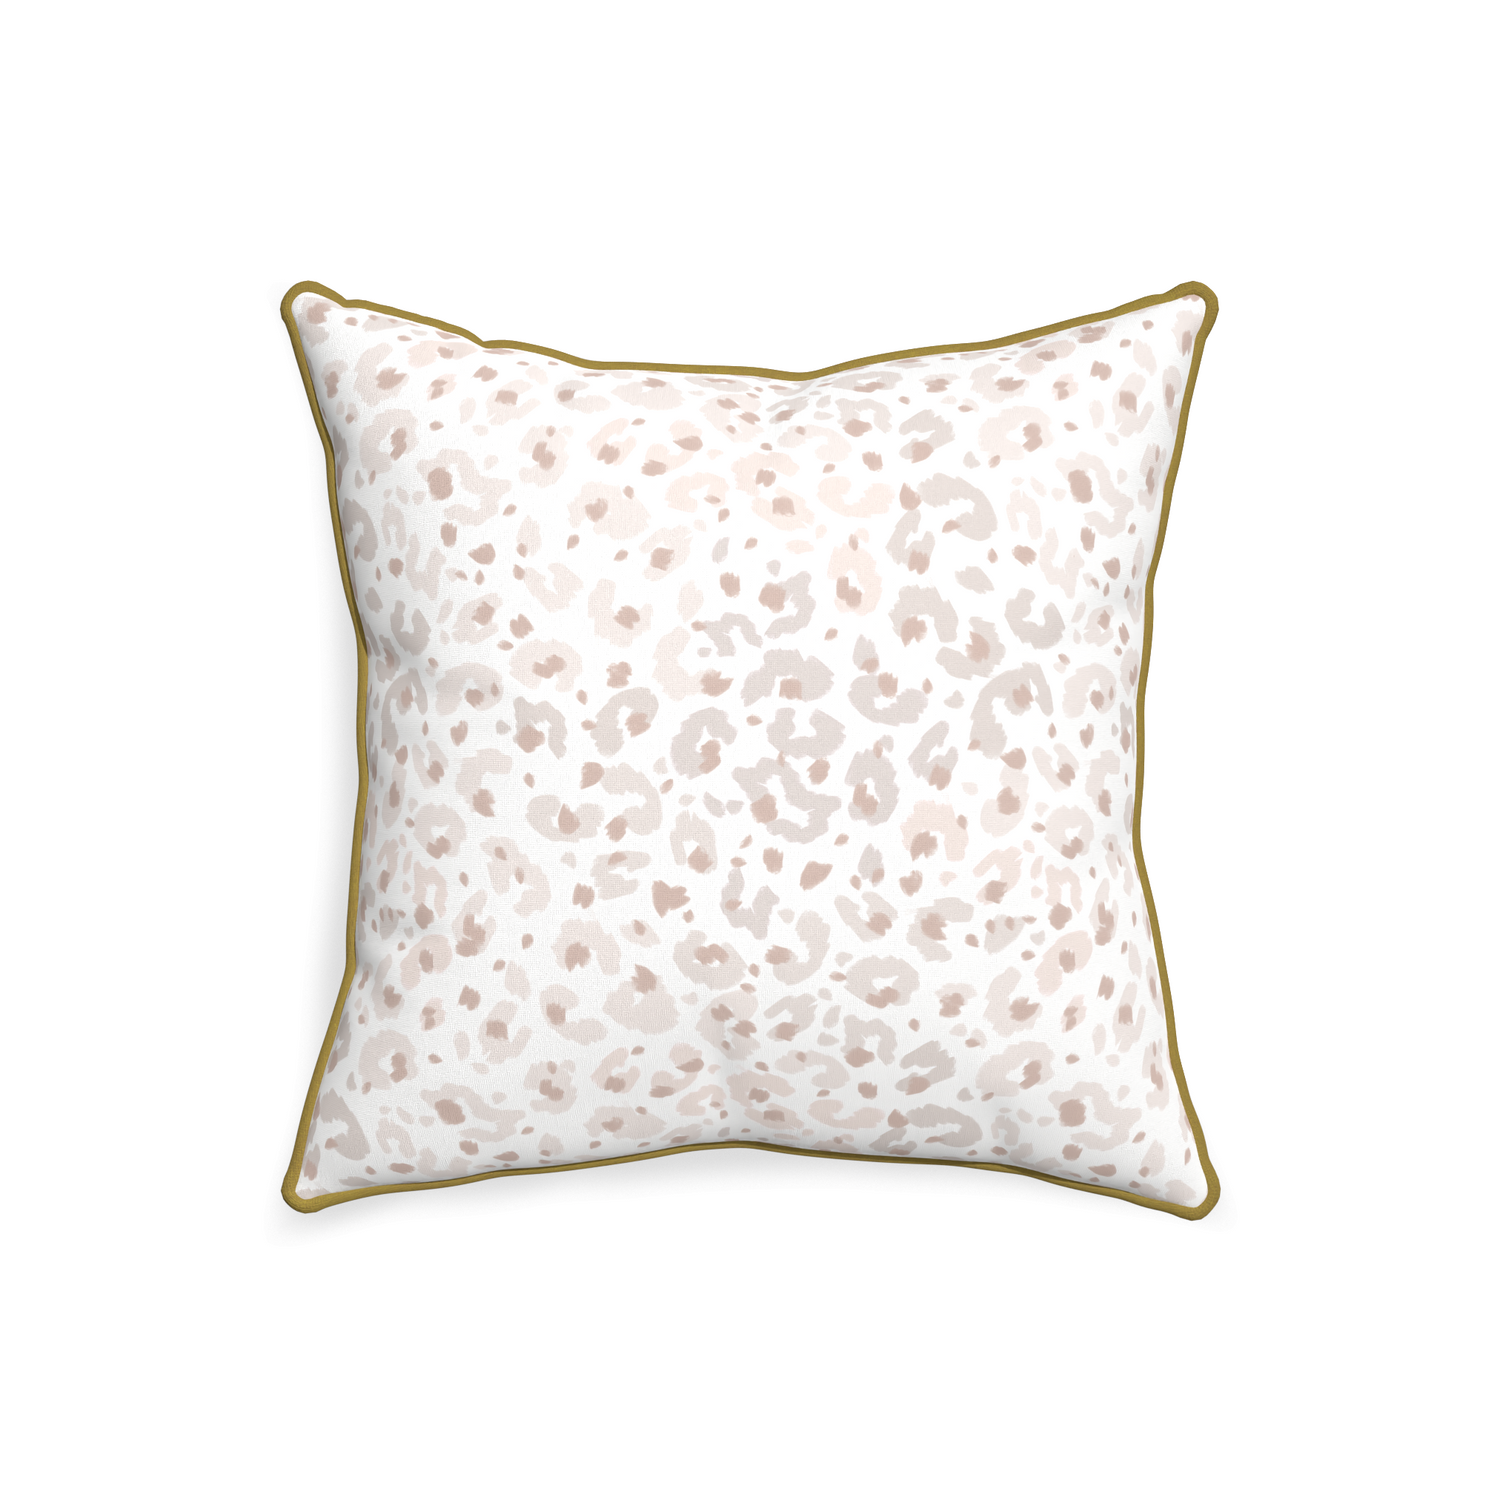 20-square rosie custom beige animal printpillow with c piping on white background